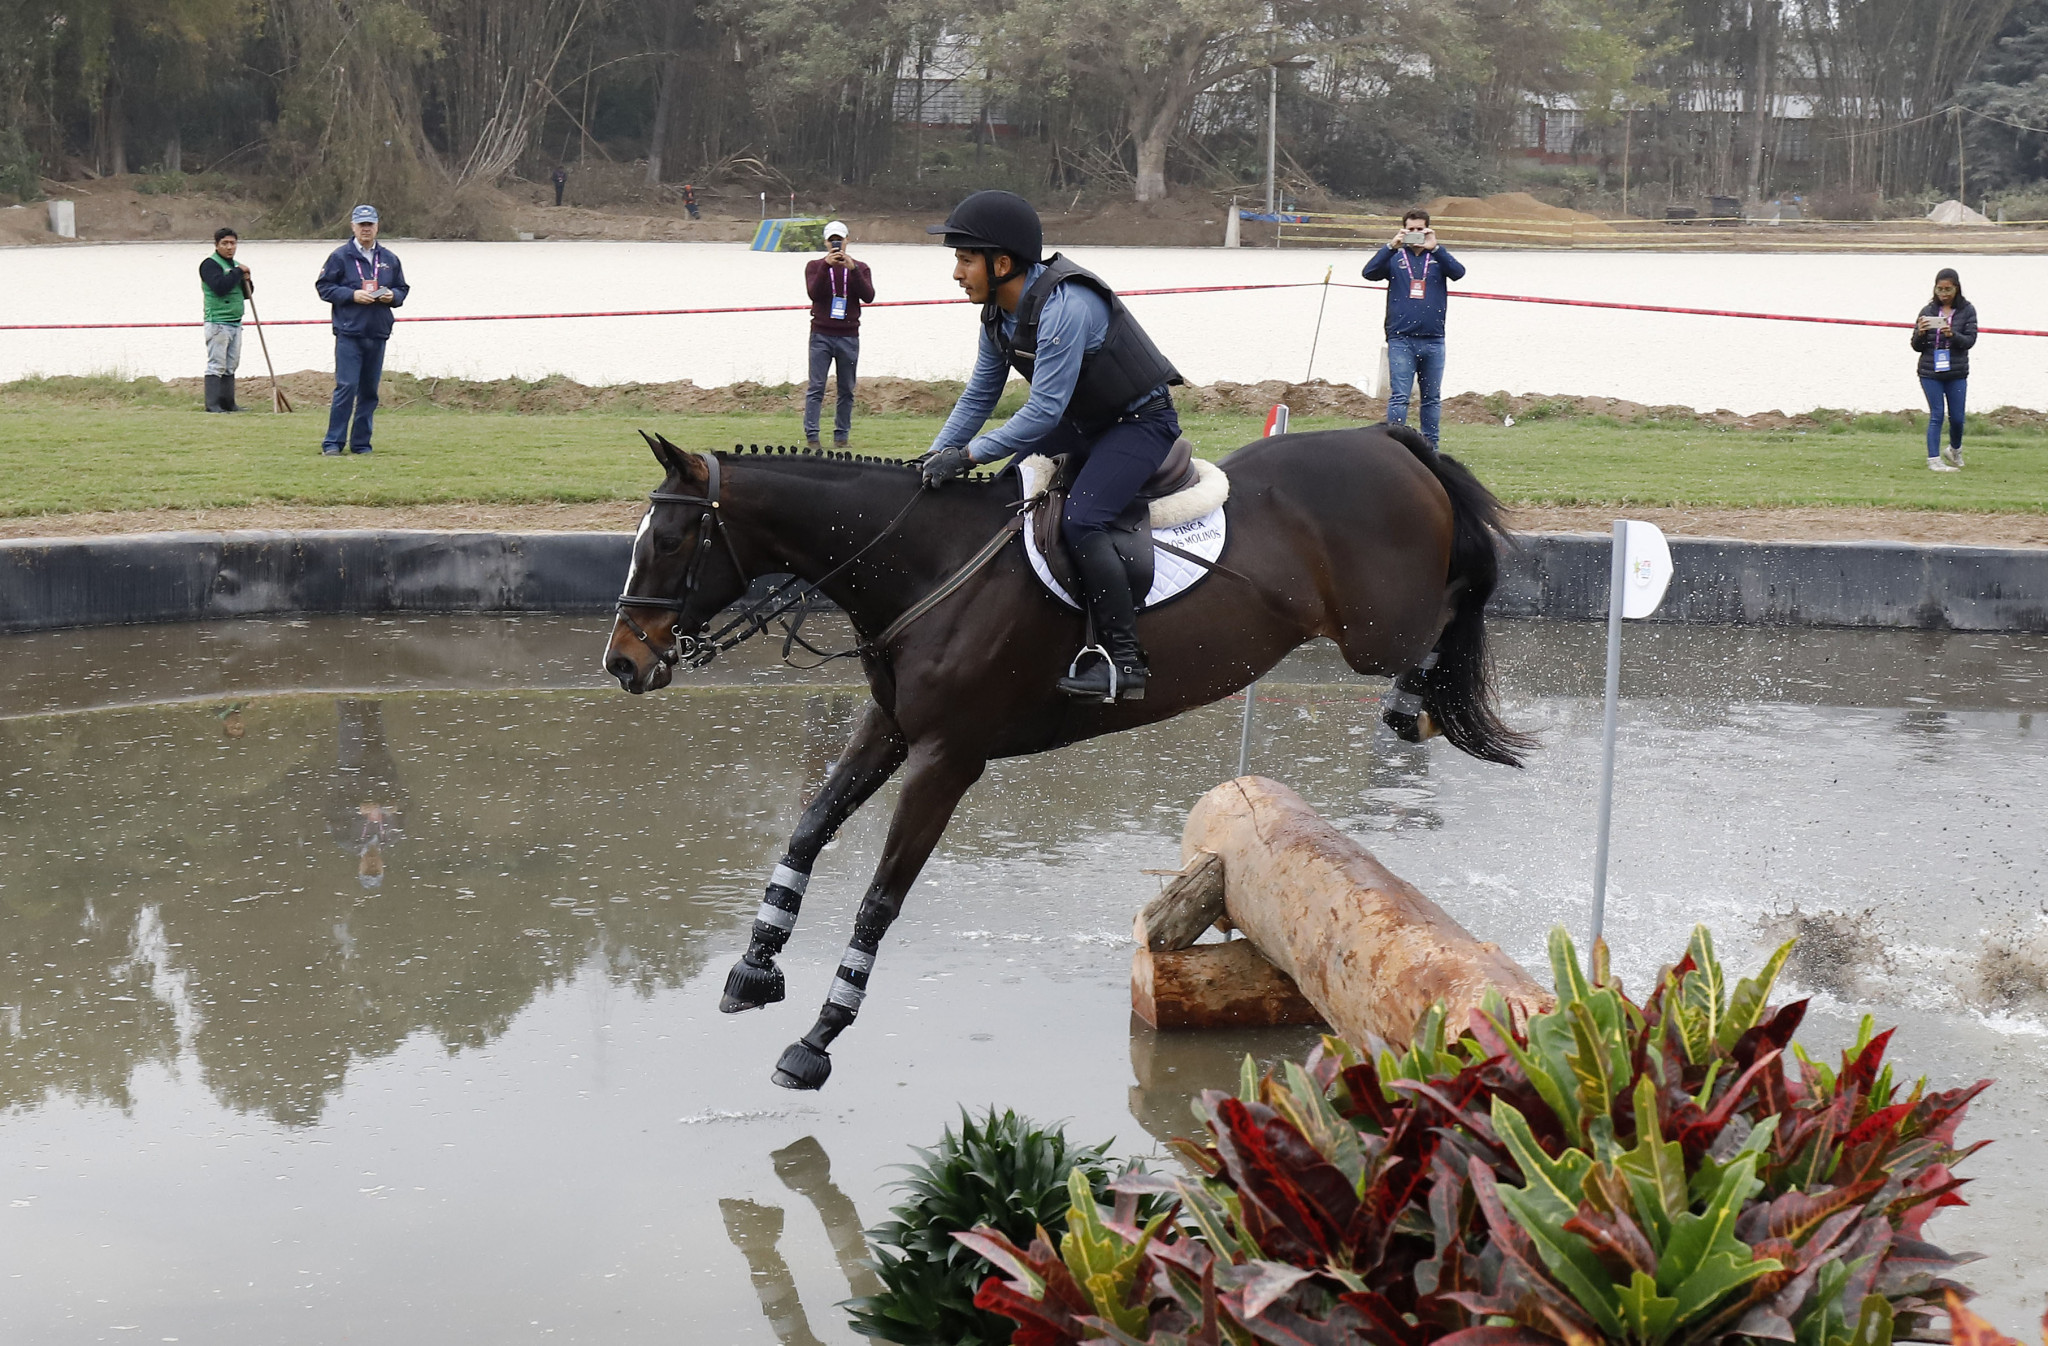 The course at the Army Equitation School in La Molina to be used for eventing during this year's Pan American Games has been tested as part of a series of events ©Lima 2019